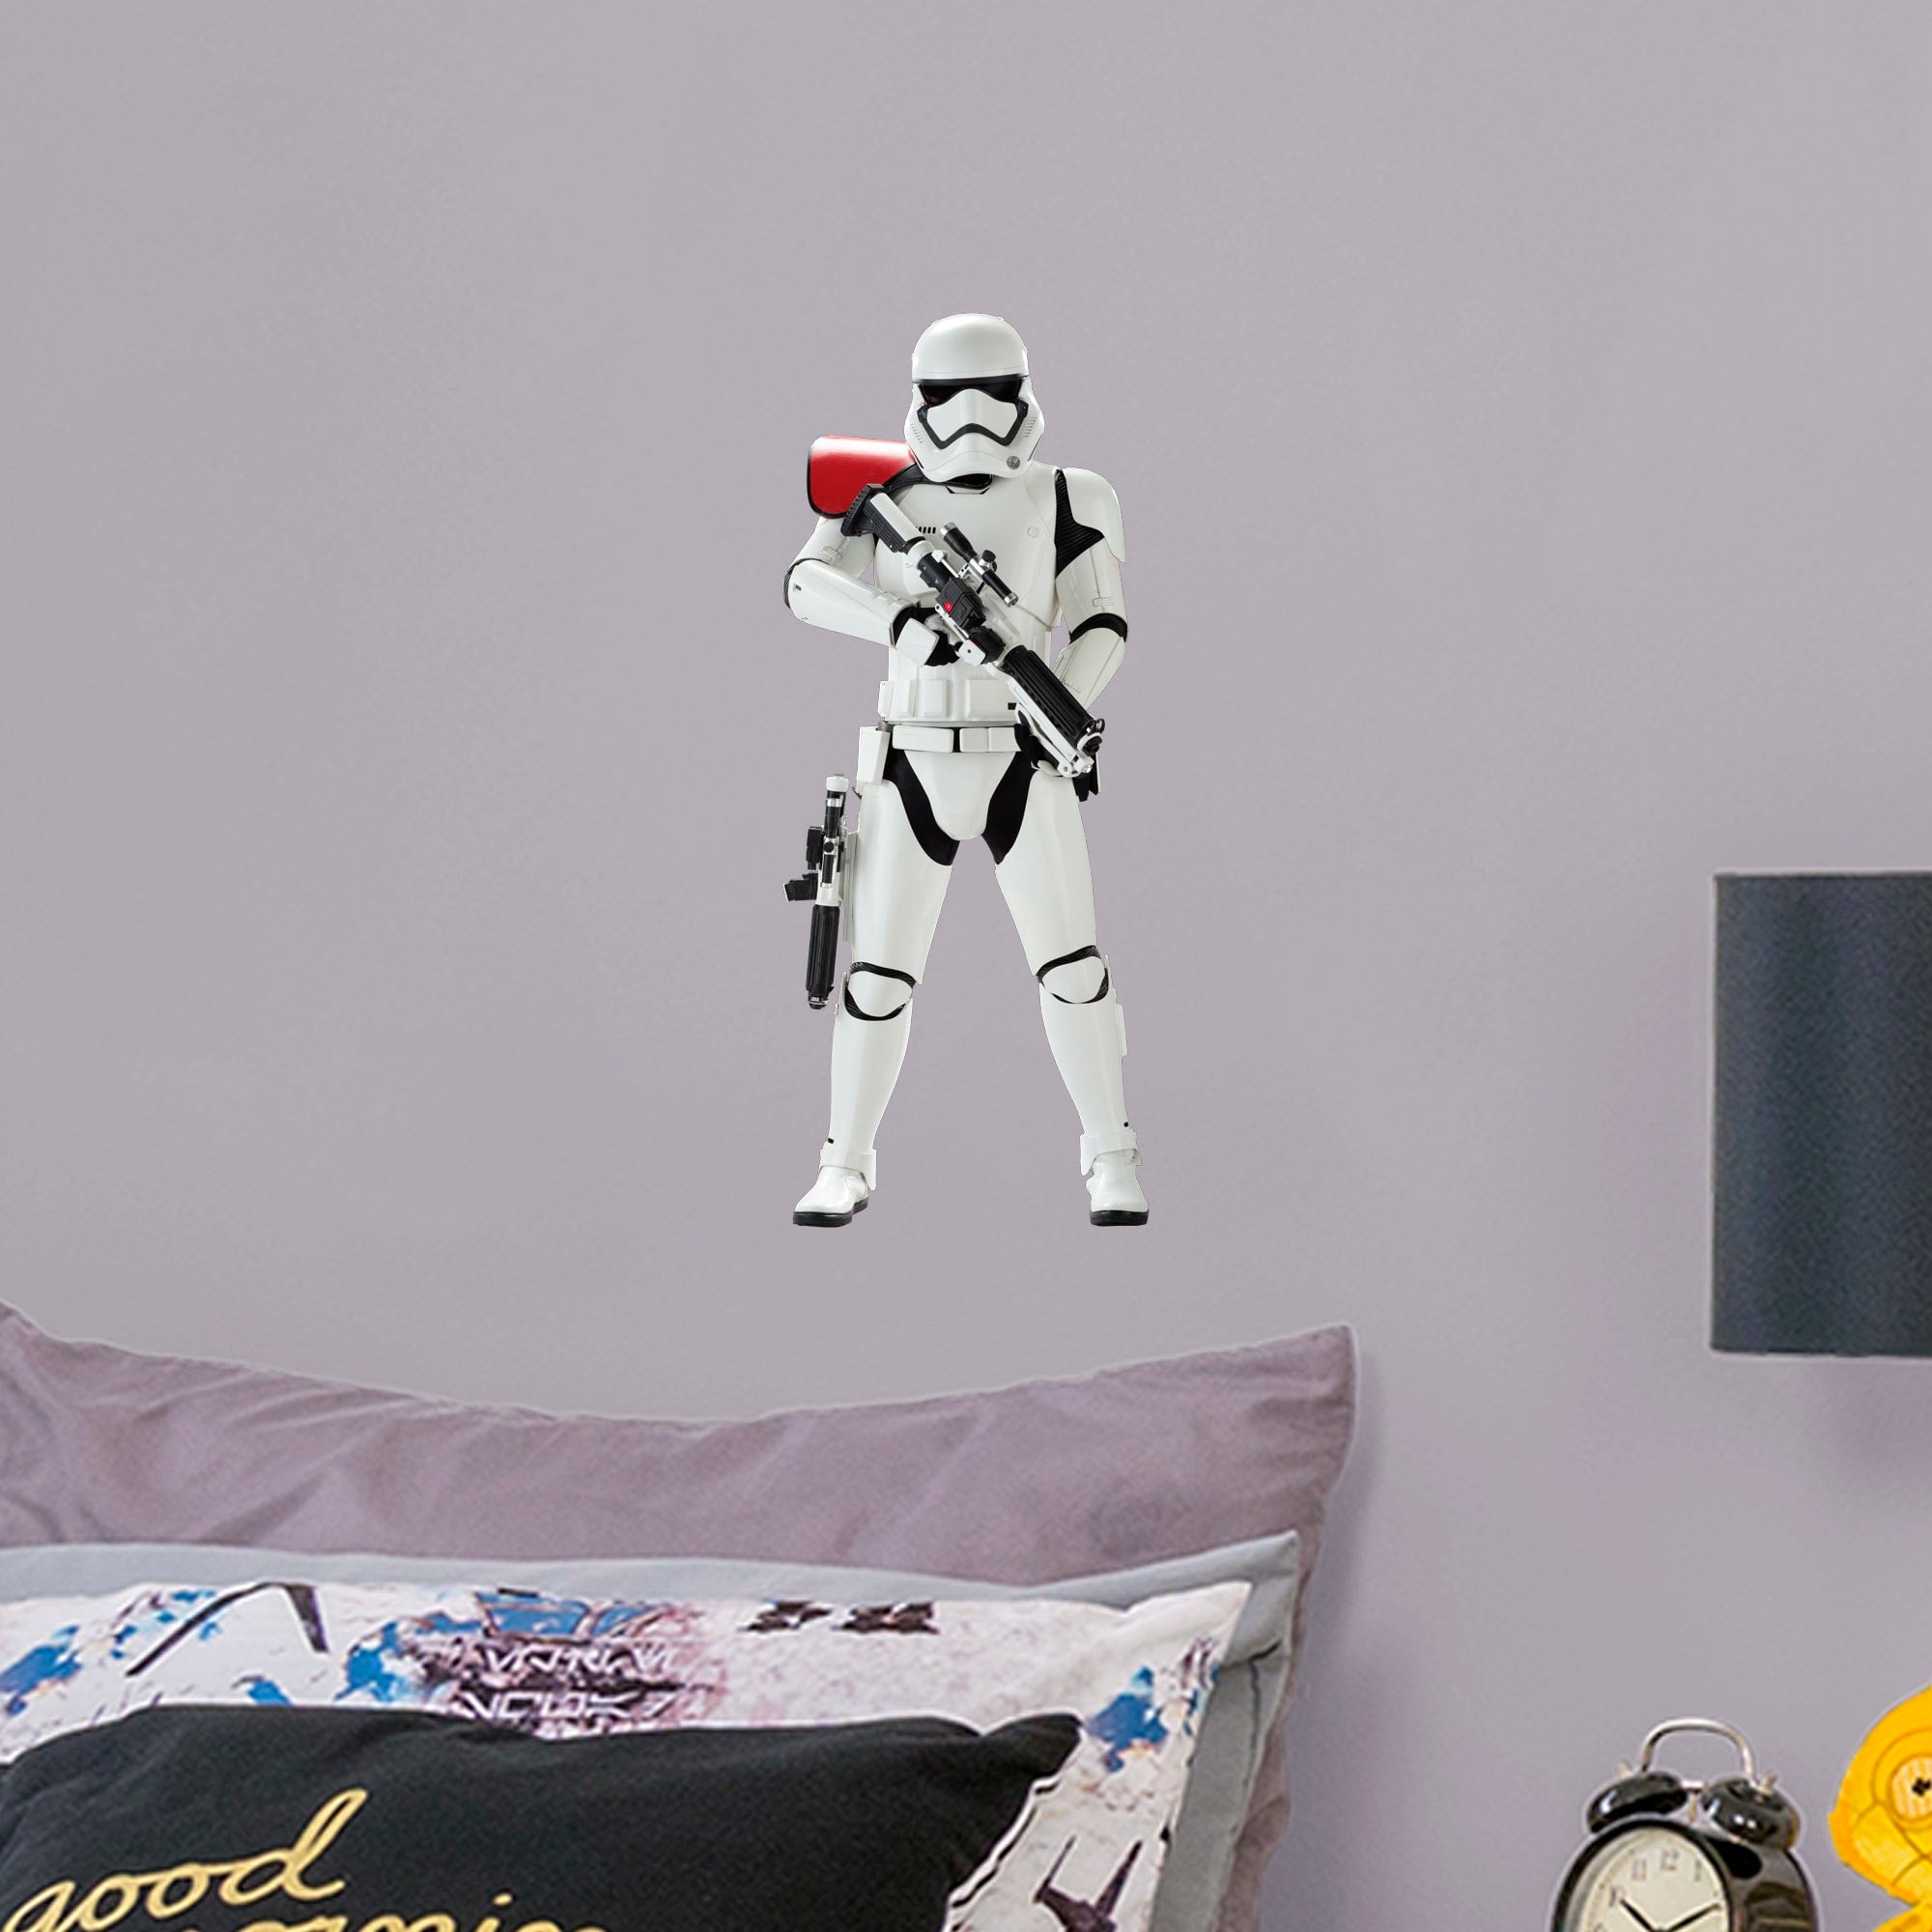 Stormtrooper - Star Wars: The Force Awakens - Officially Licensed Removable Wall Decal Large by Fathead | Vinyl